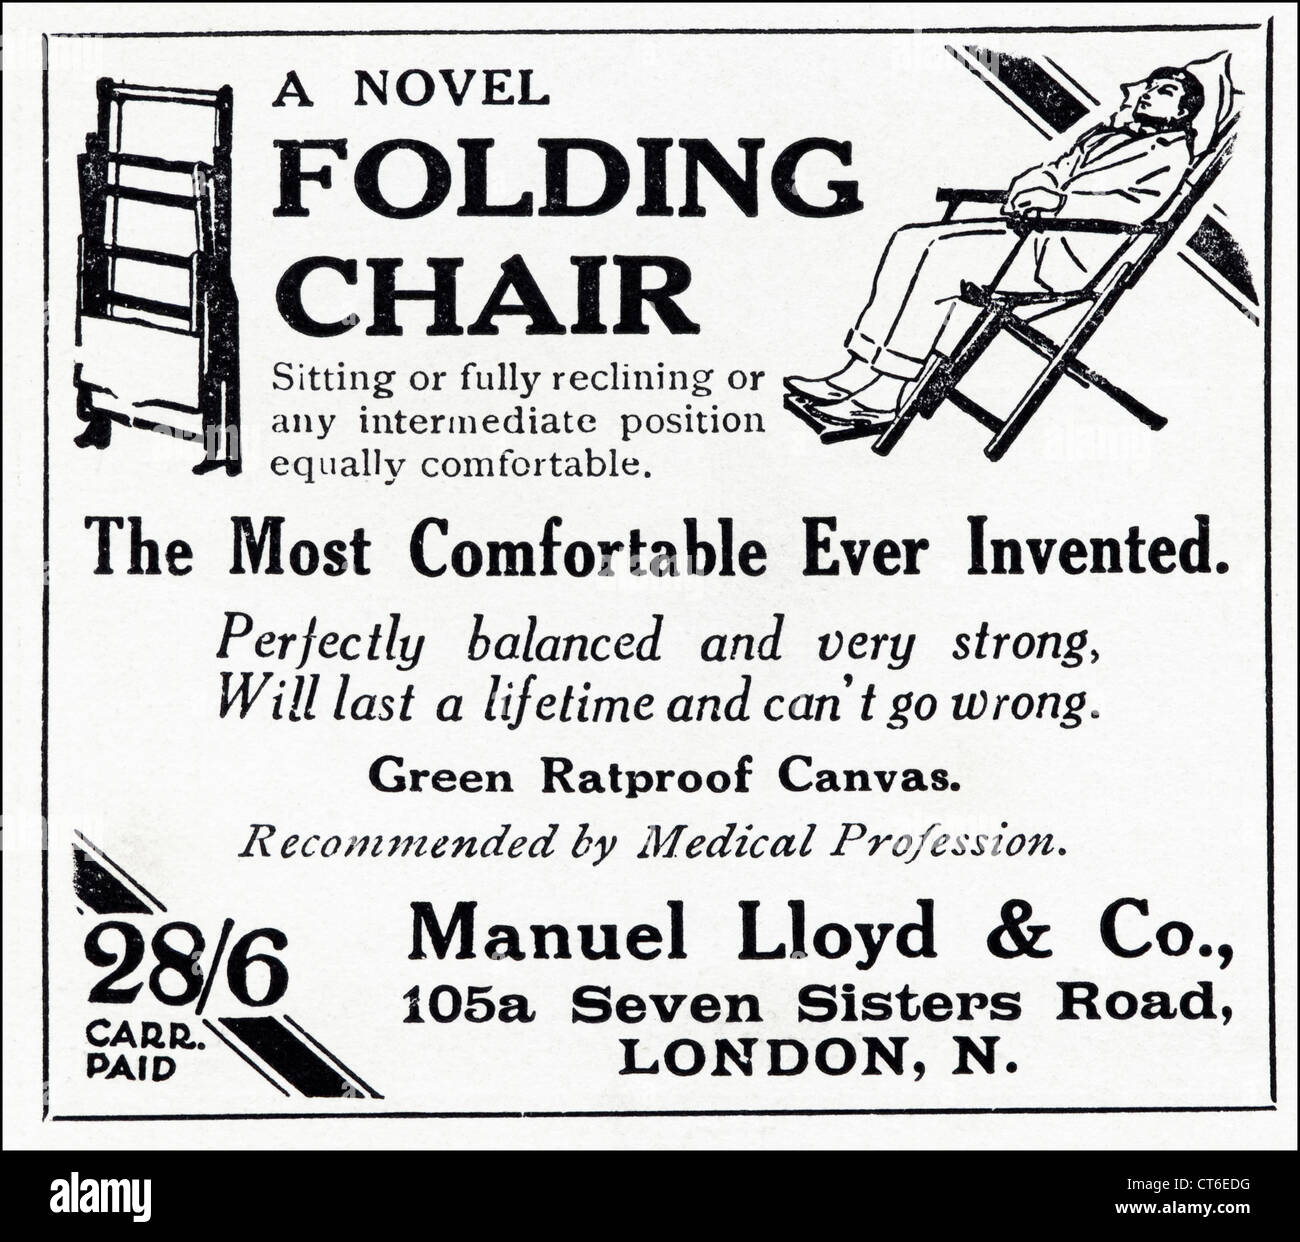 Original 1920s vintage print advertisement from English consumer magazine advertising FOLDING CHAIR with ratproof canvas Stock Photo